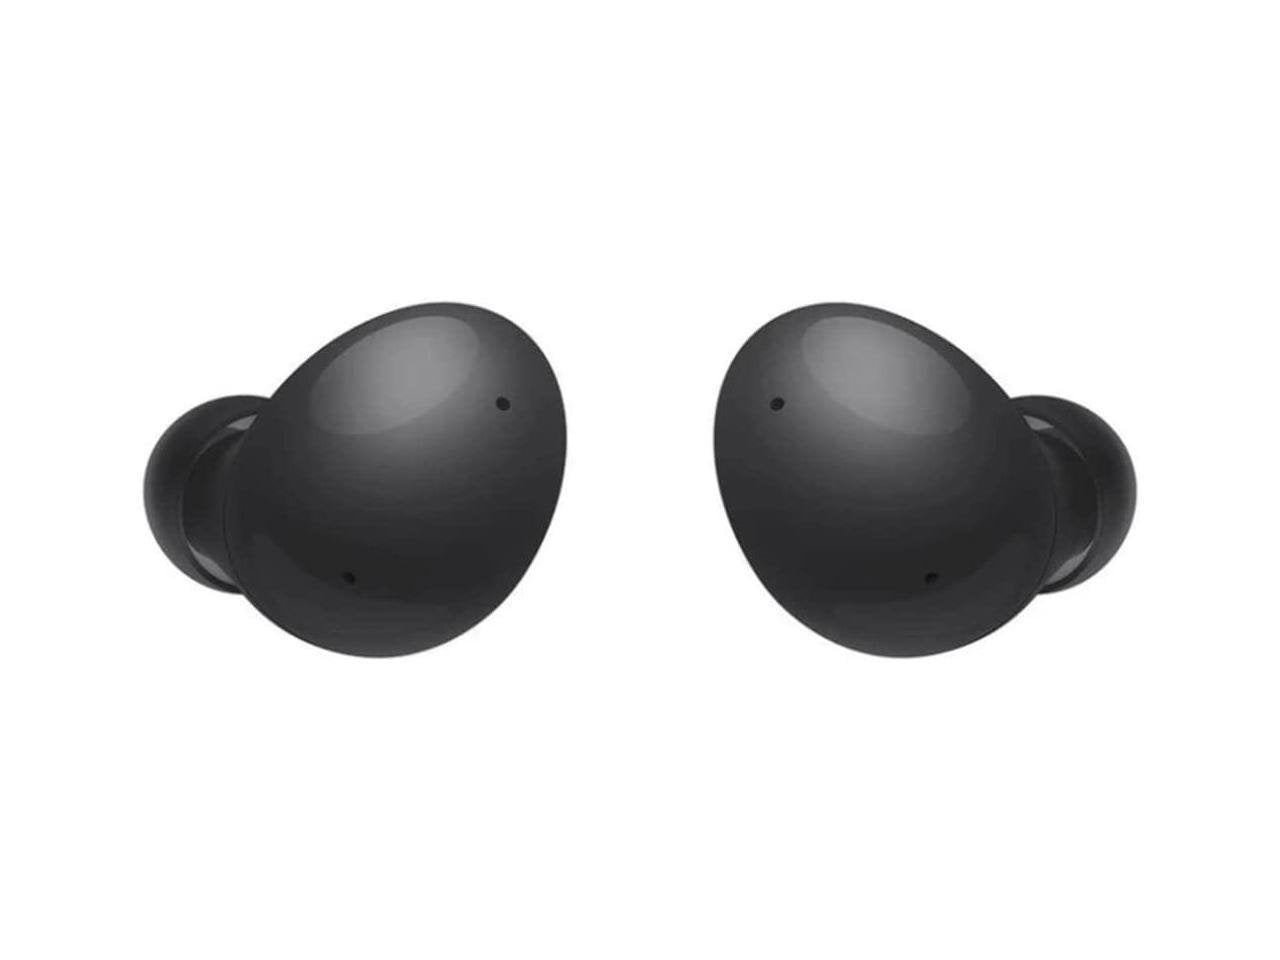 Samsung Galaxy Buds2 True Wireless Earbuds Noise Cancelling Ambient Sound Bluetooth Lightweight Comfort Fit Touch Control, International Version - Onyx